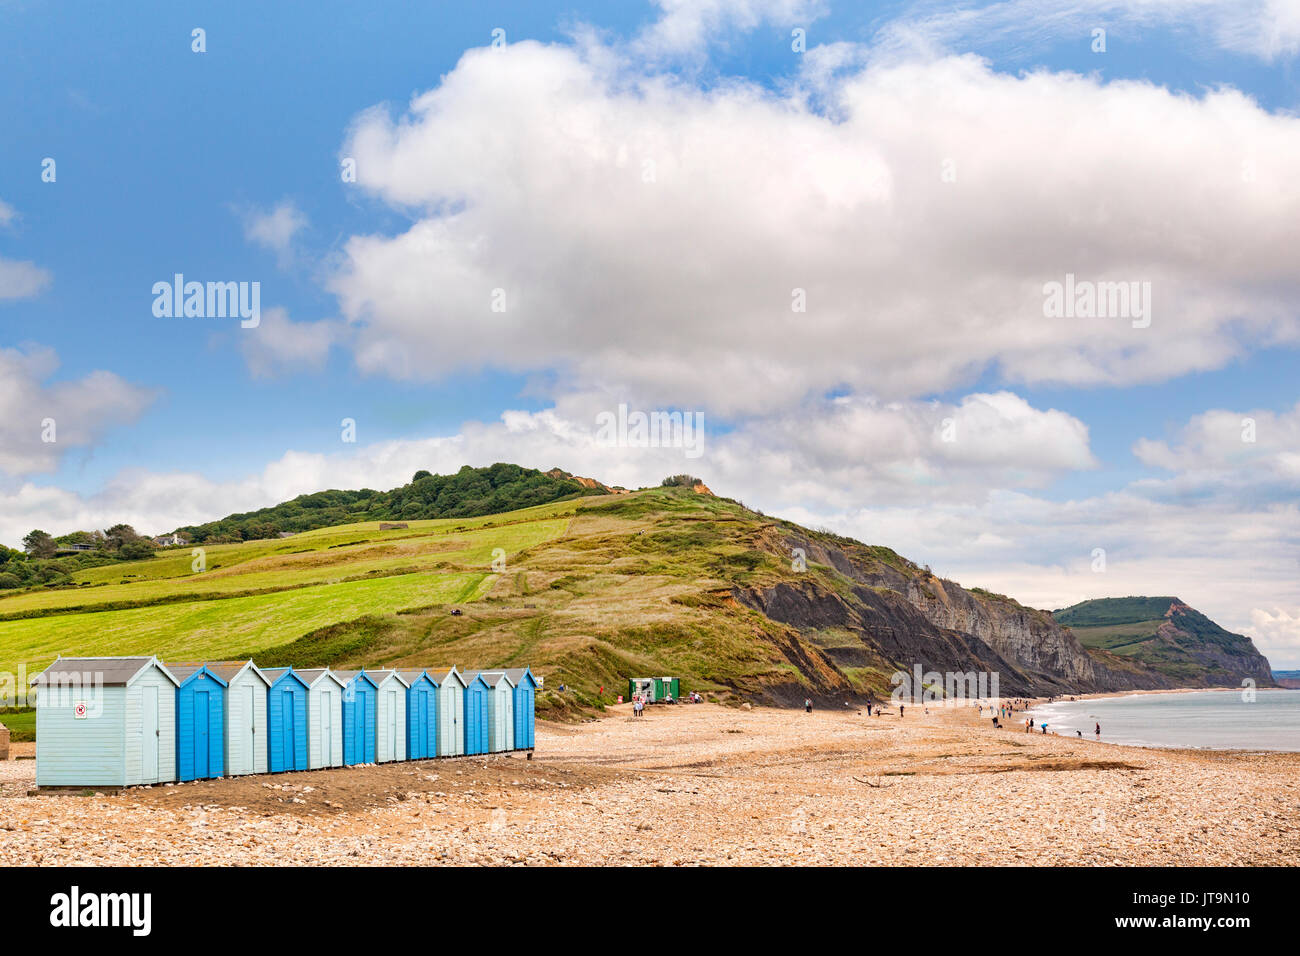 30 June 2017: Charmouth, Dorset, England, UK - The beach in summer, popular with fossil hunters. Stock Photo